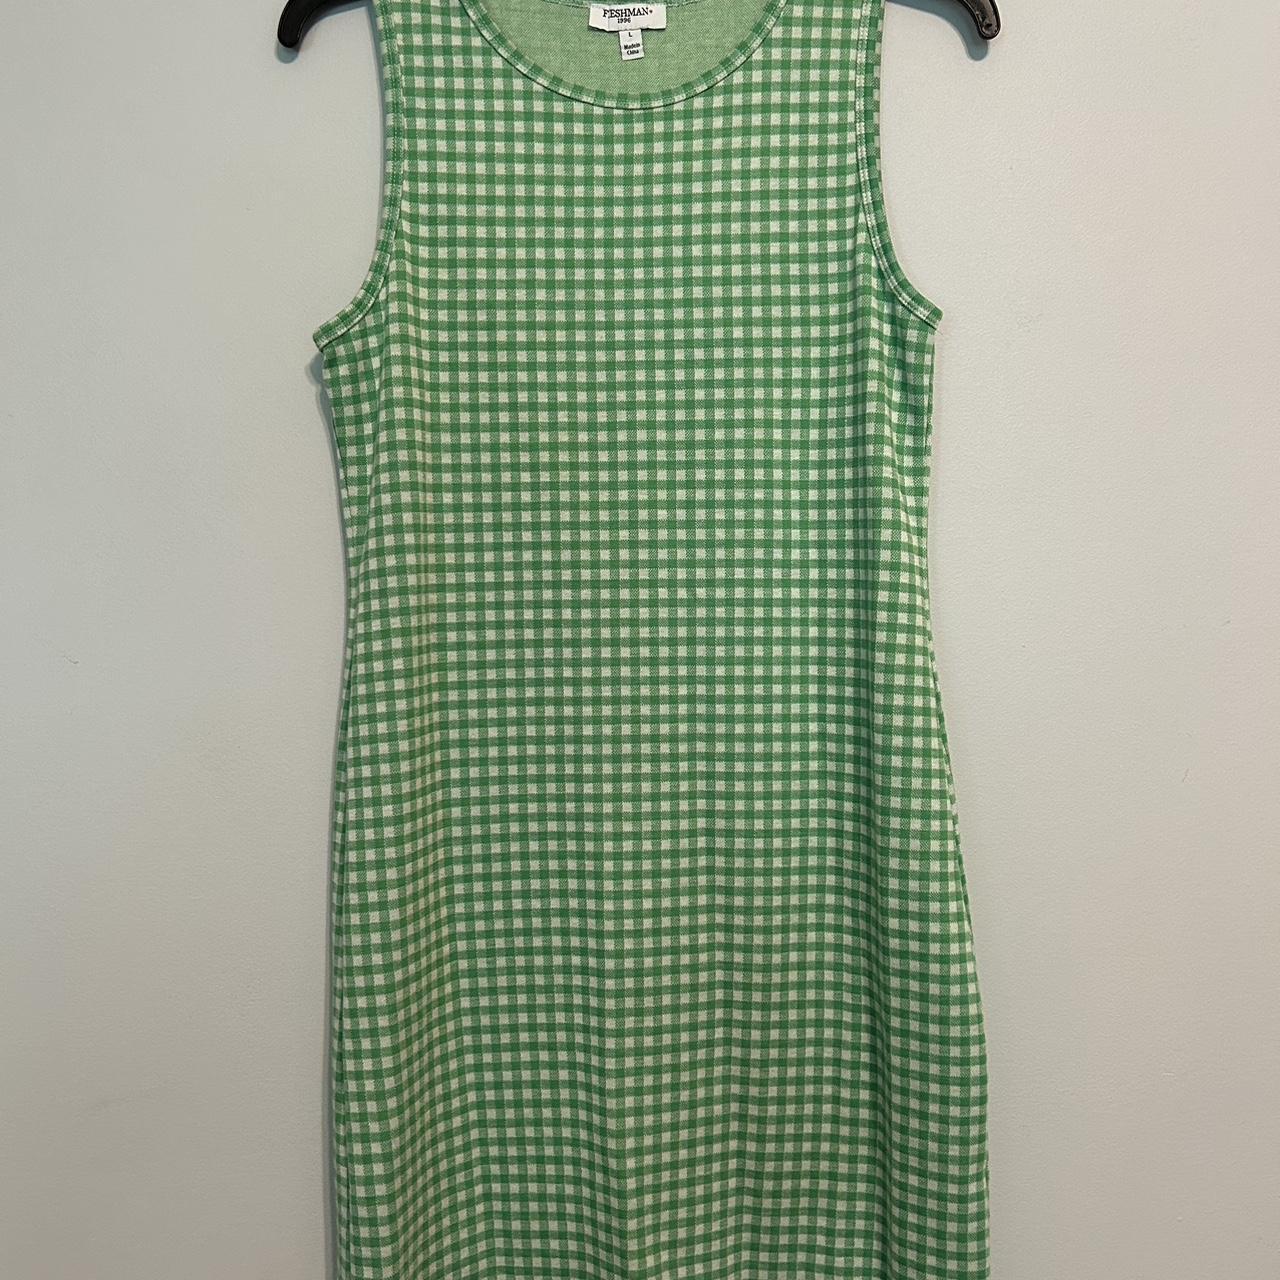 Gingham Green colored dress Basically Brand New no... - Depop